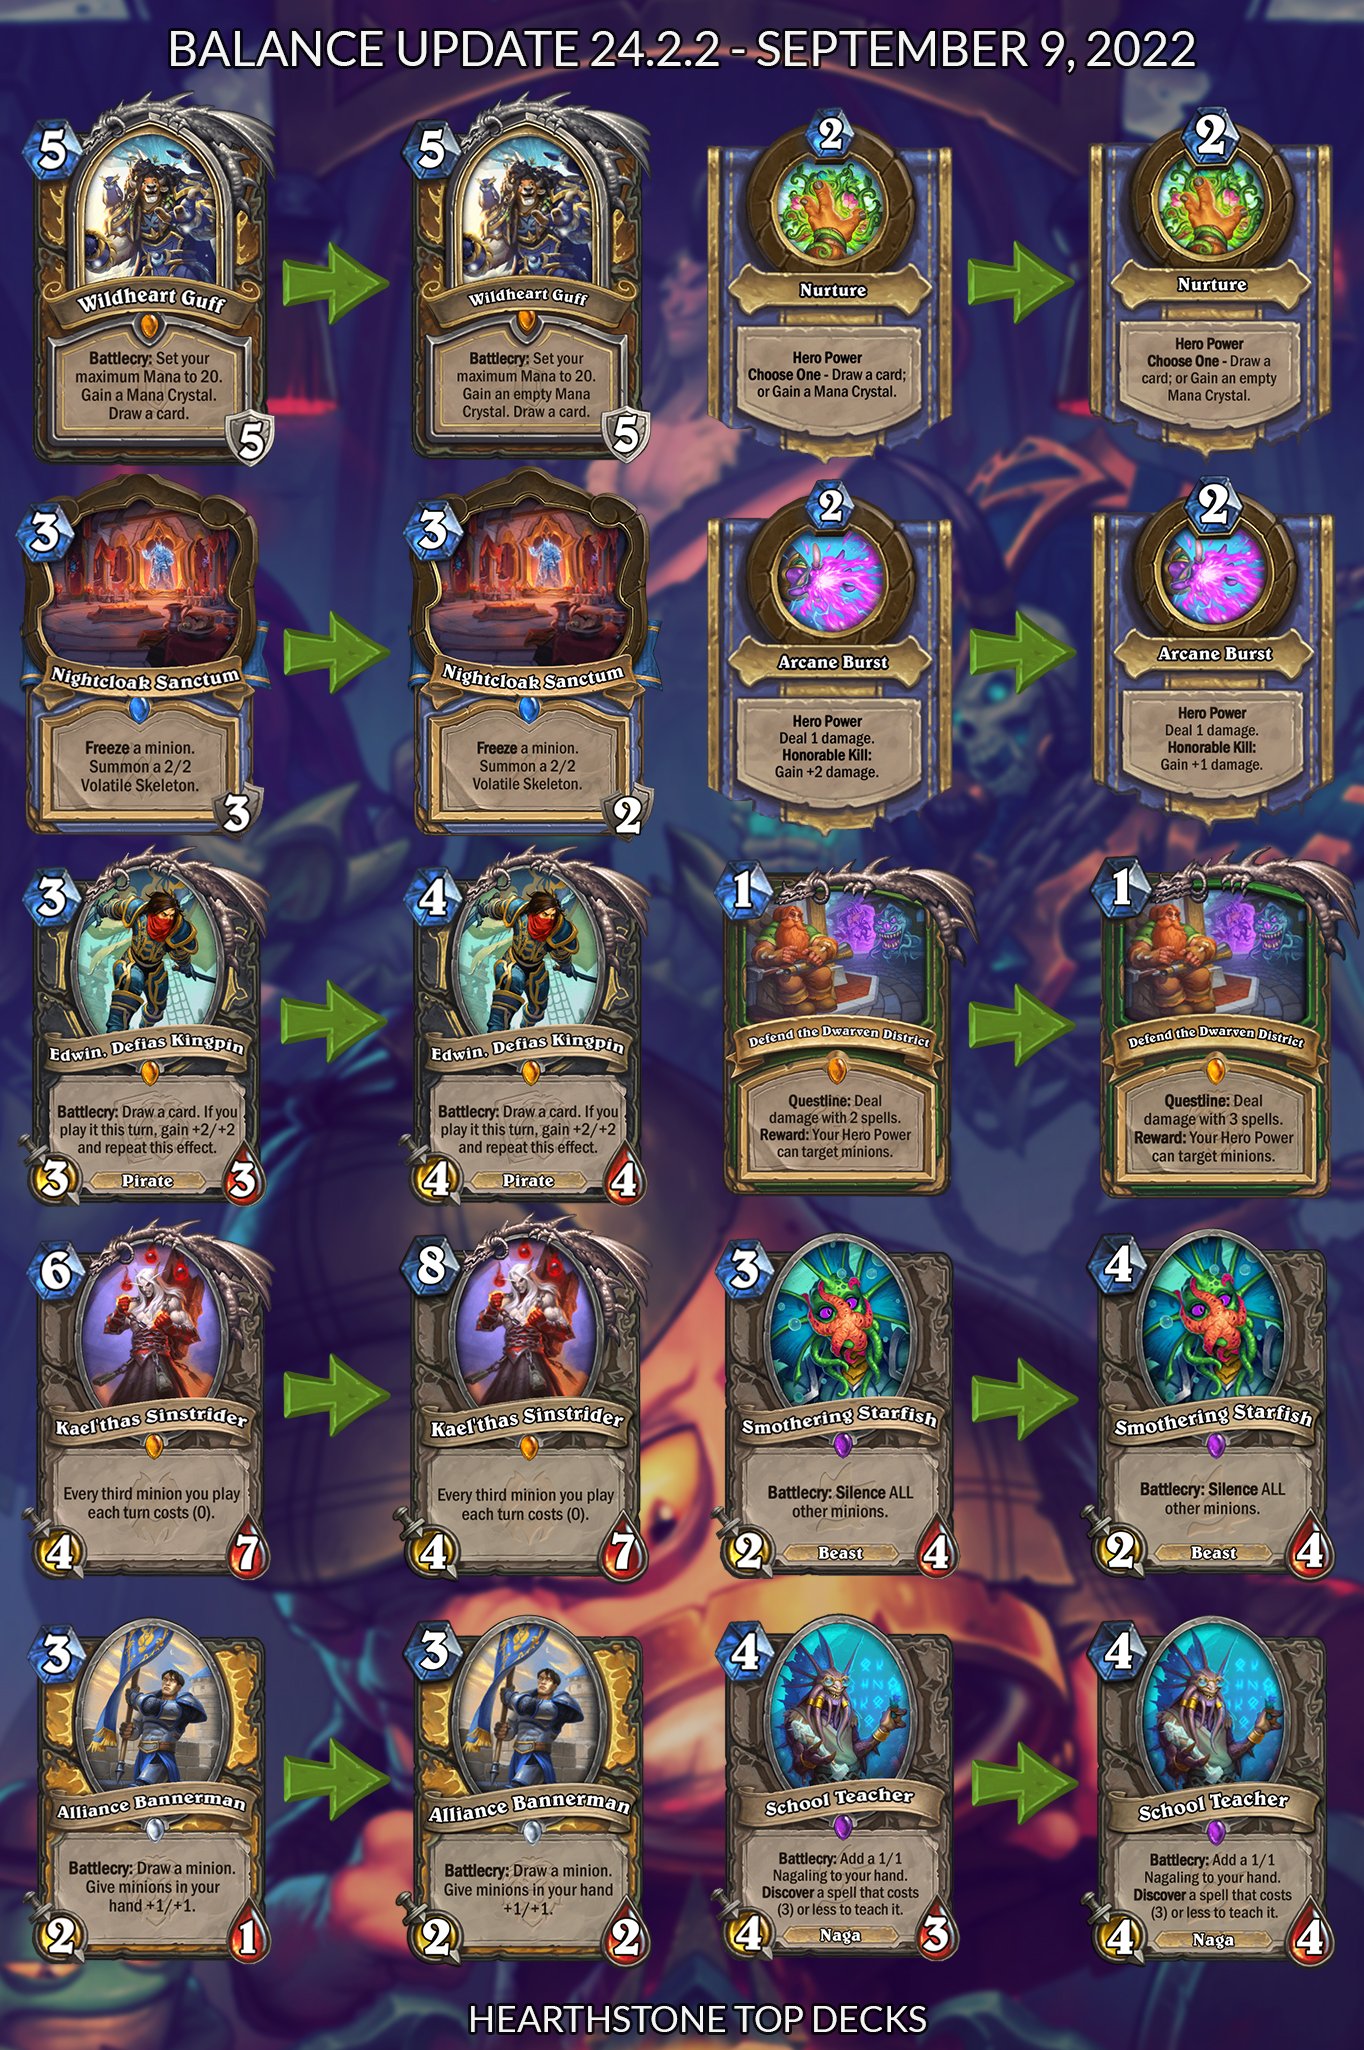 Hearthstone Top Decks💙 on "Patch 24.2.2 is scheduled for later today! comes with 8 nerfs &amp; 2 buffs in Constructed Guff nerf!), as well as multiple balance changes in